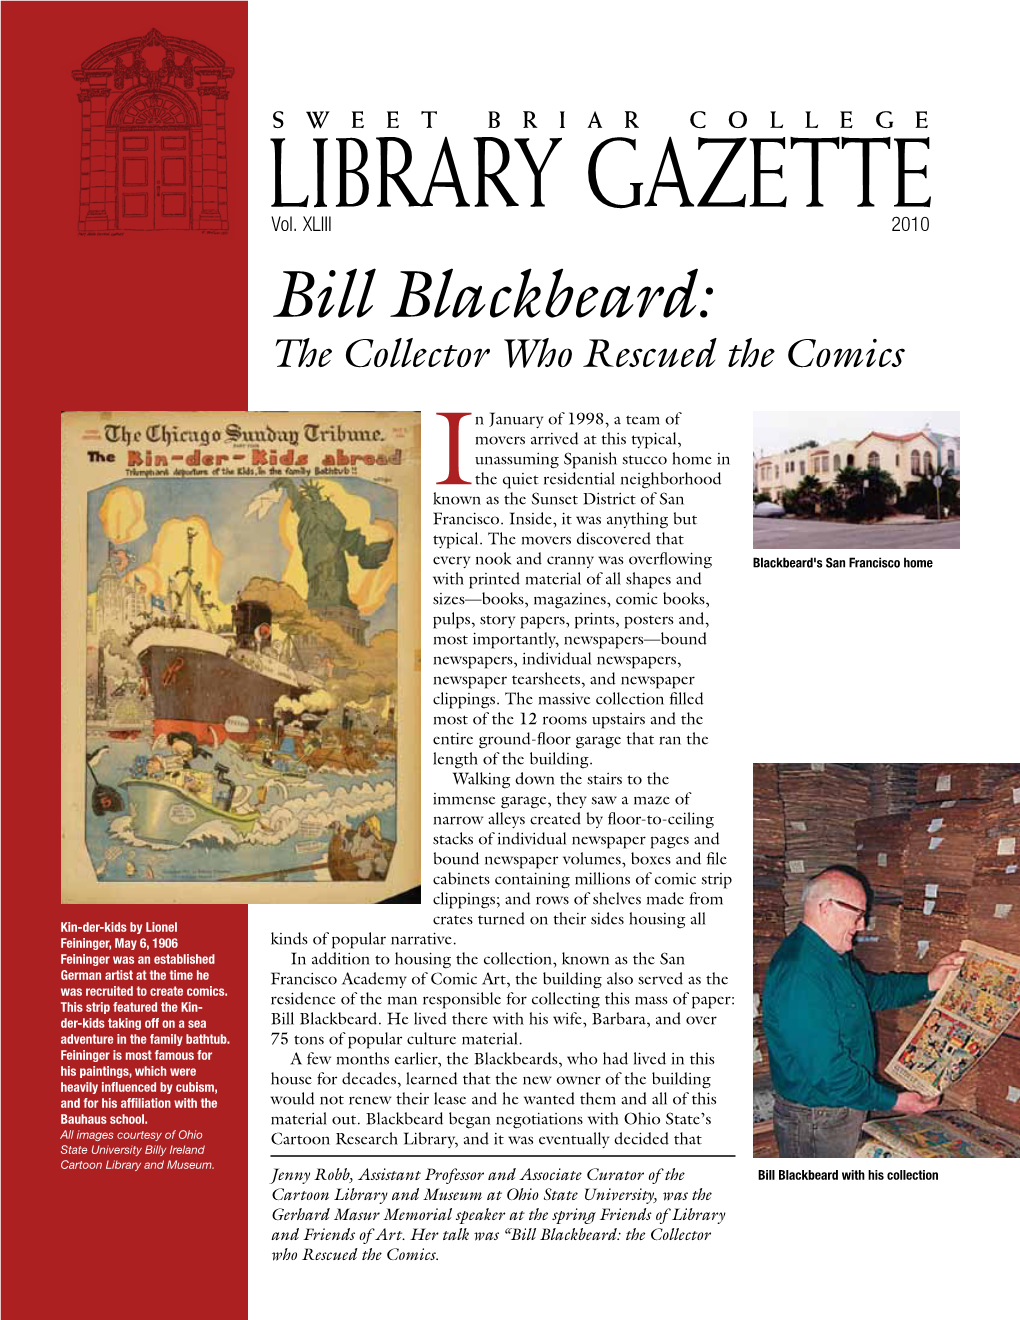 Bill Blackbeard: the Collector Who Rescued the Comics